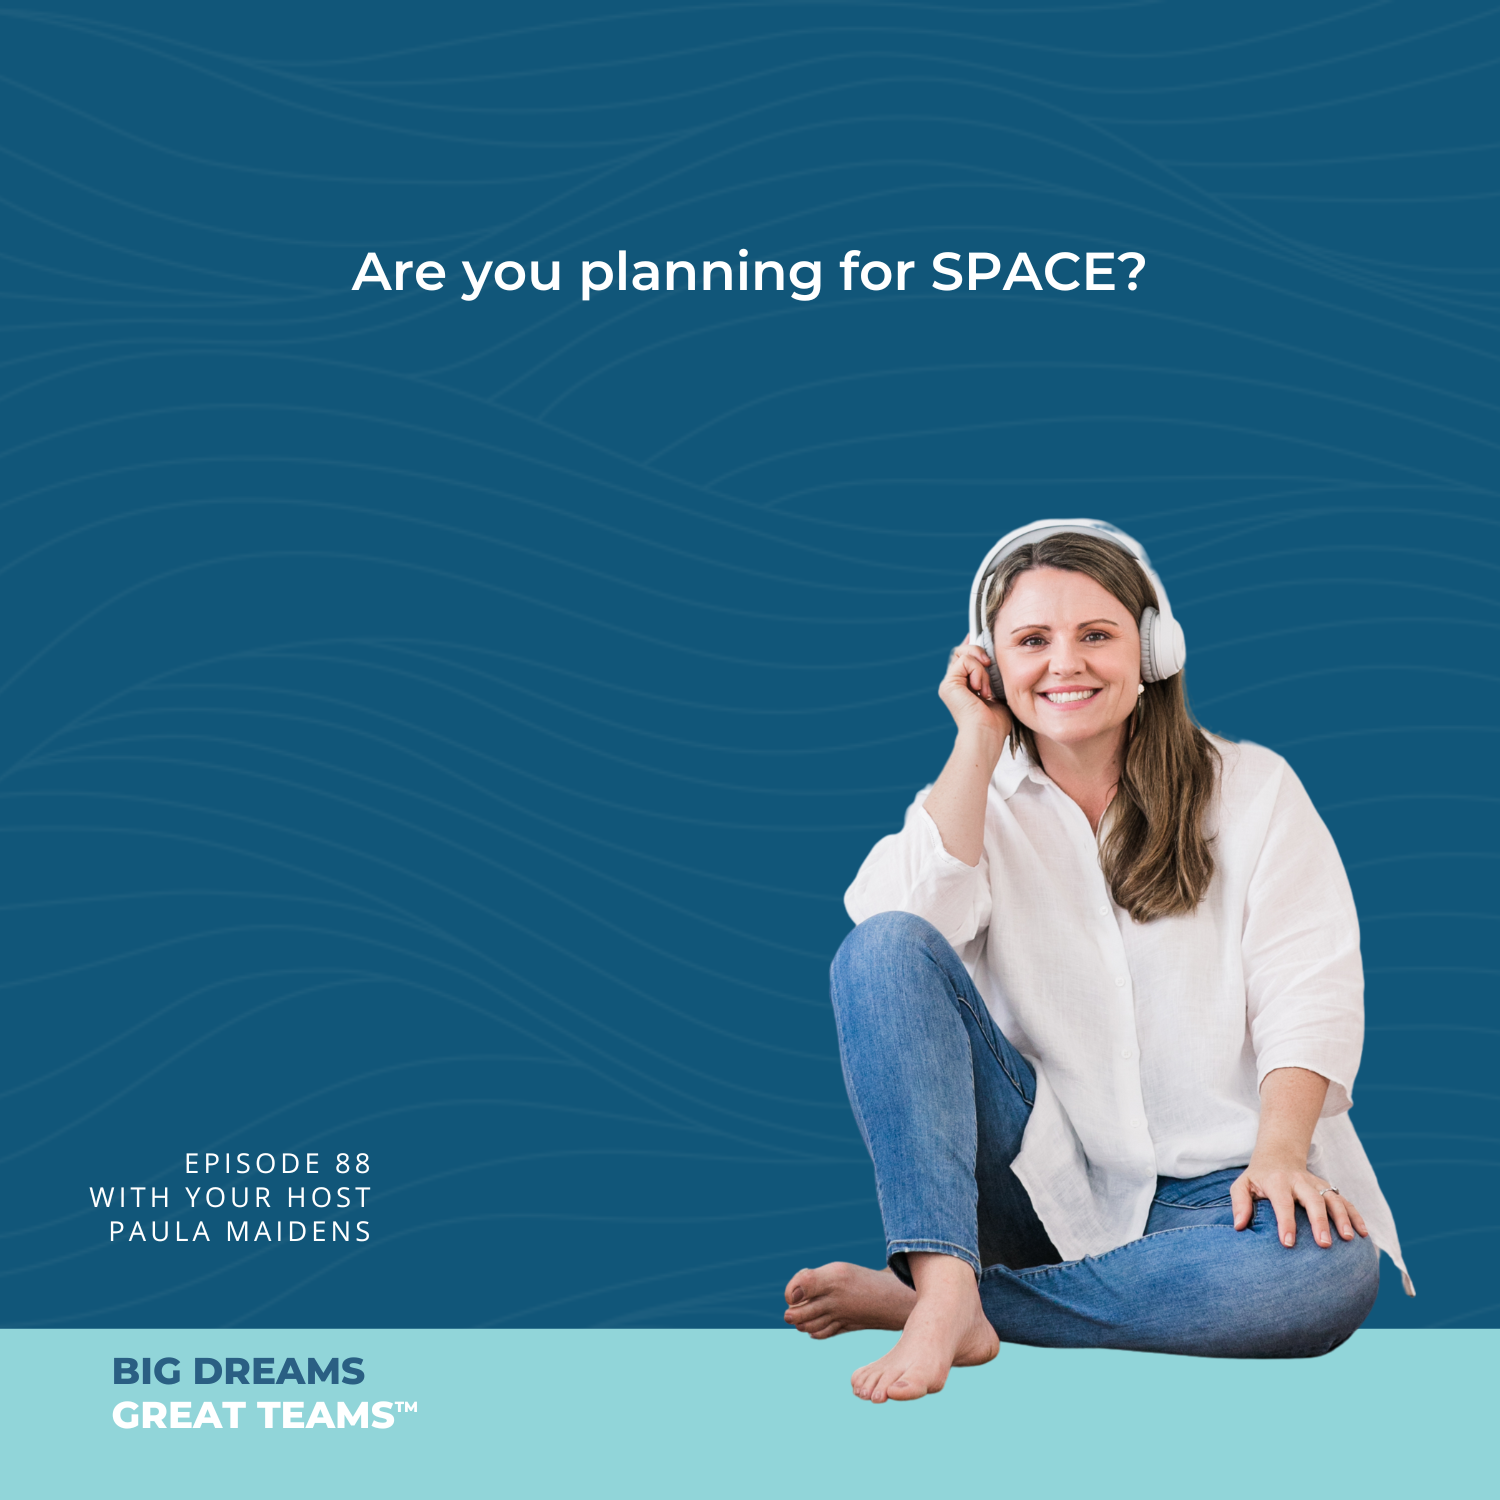 EPISODE #88 ARE YOU PLANNING FOR SPACE?